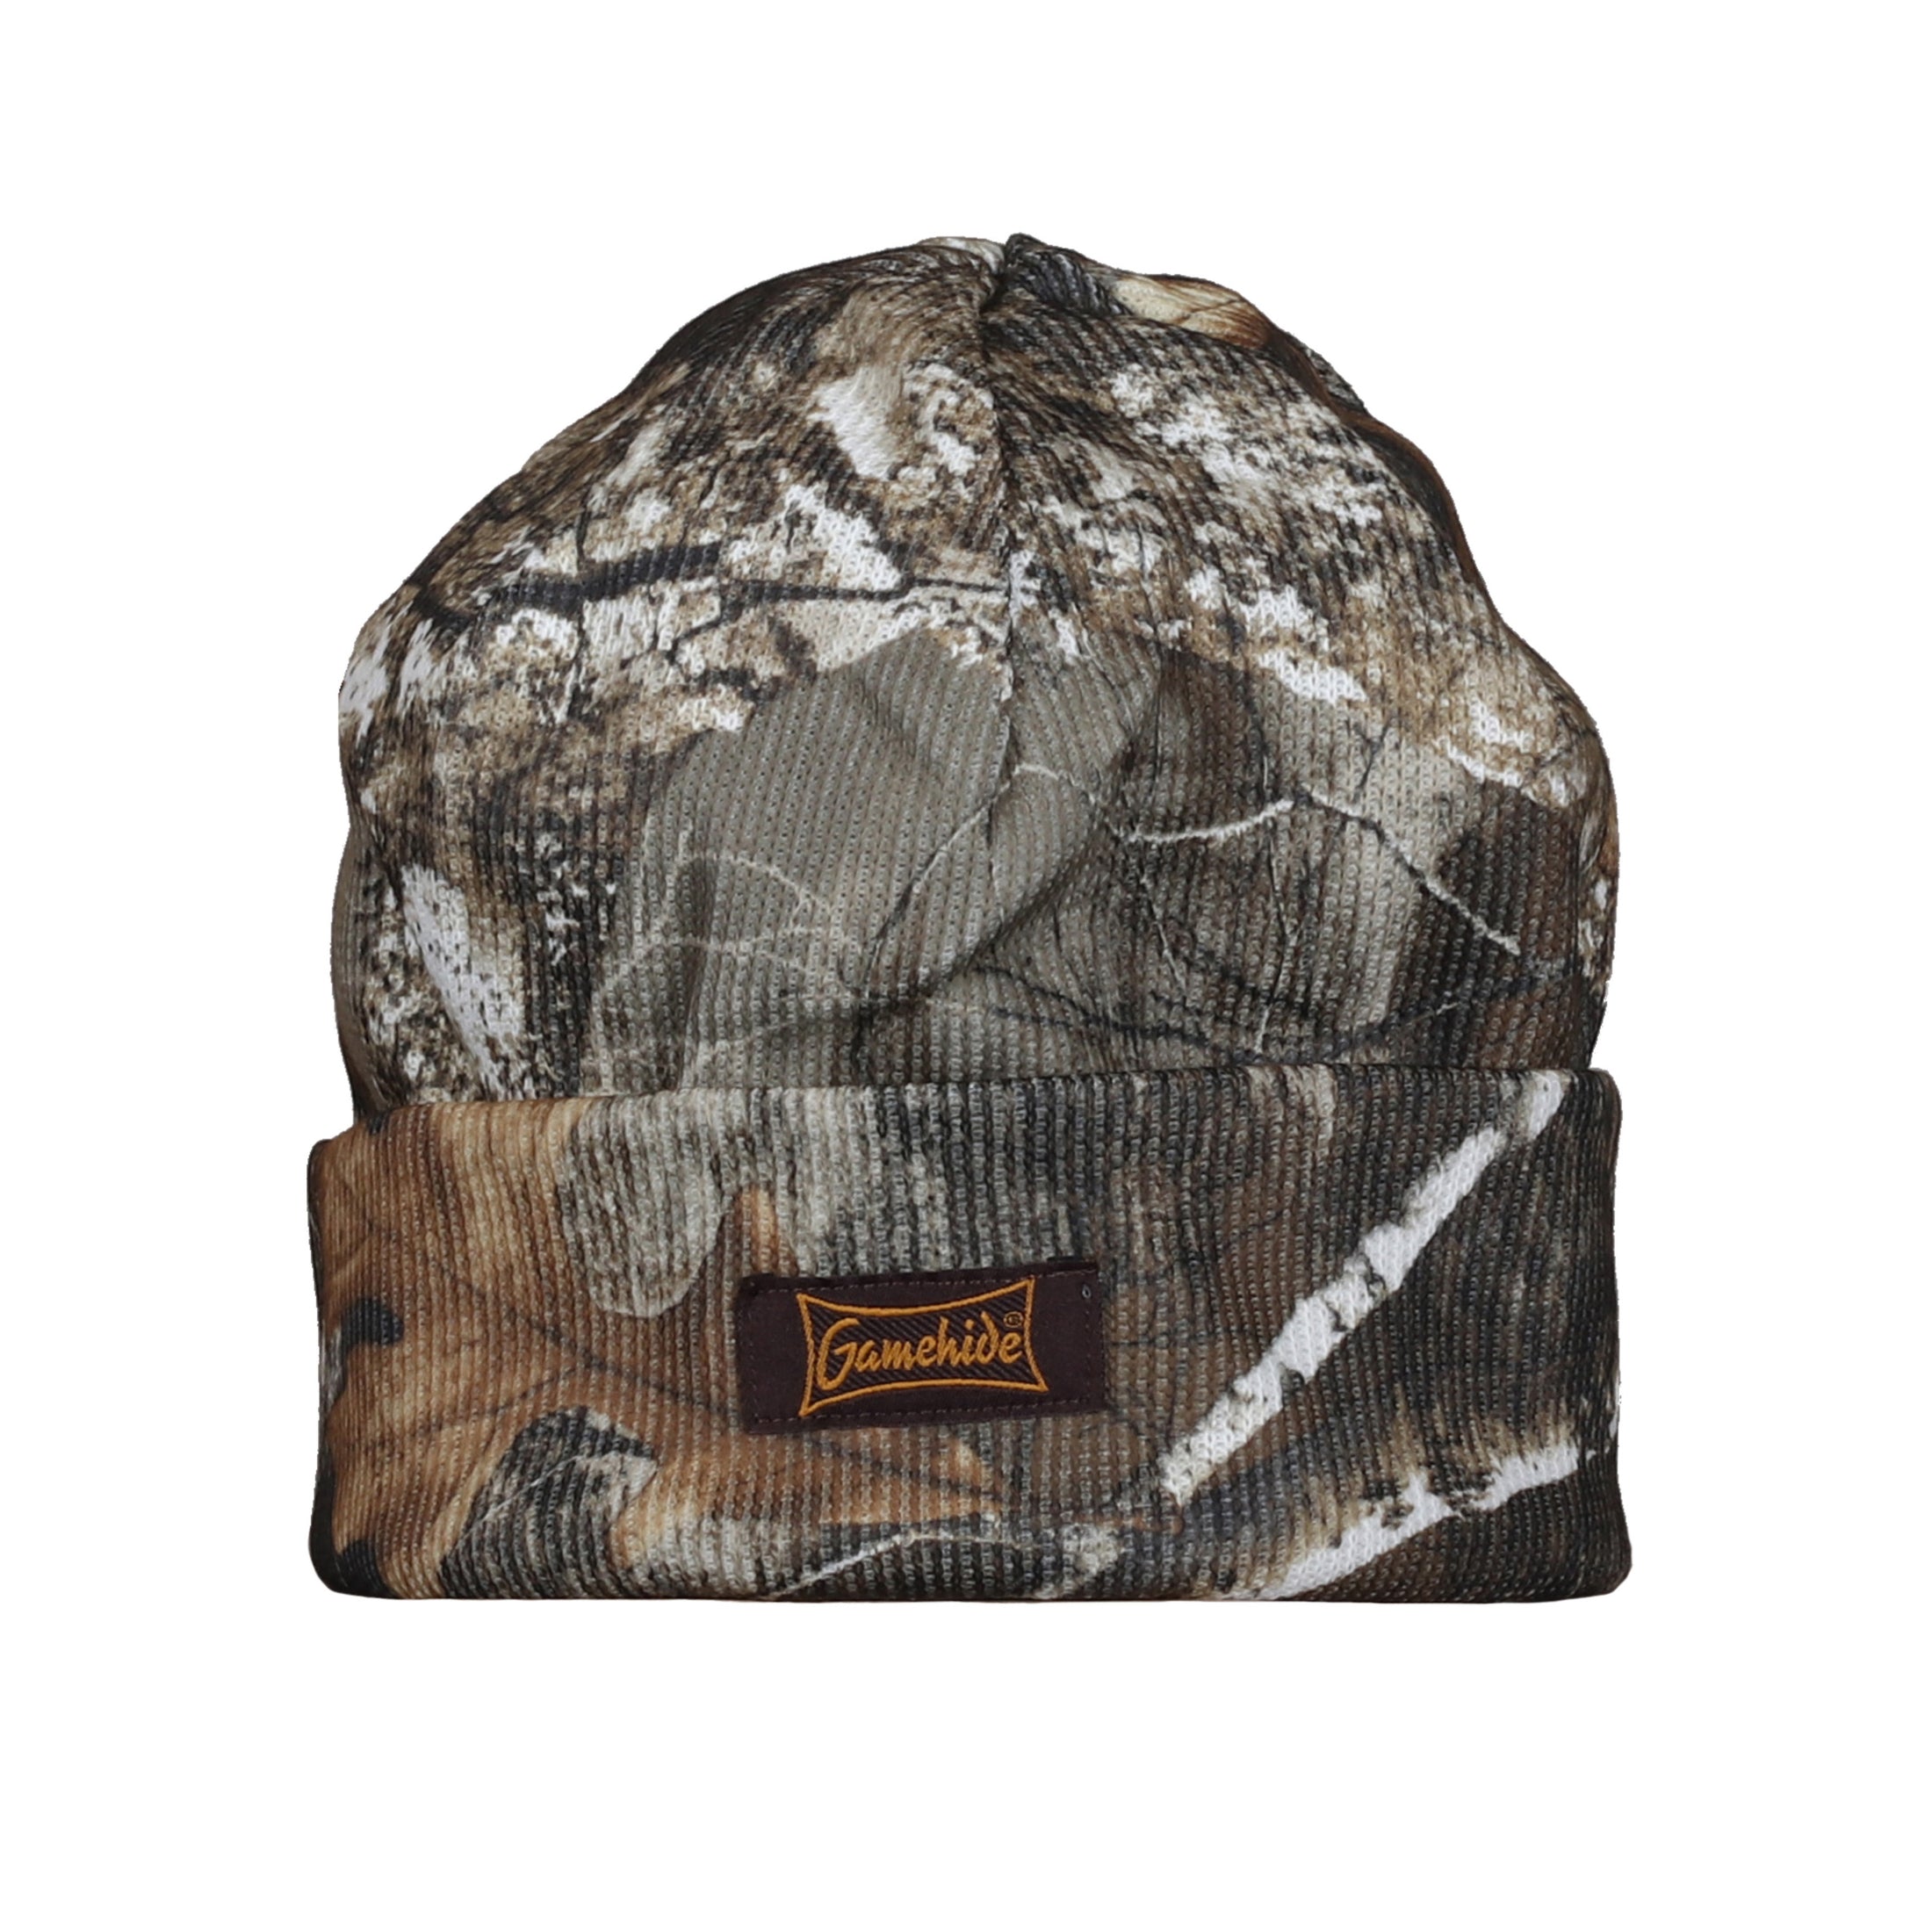 gamehide knit hat (realtree edge)